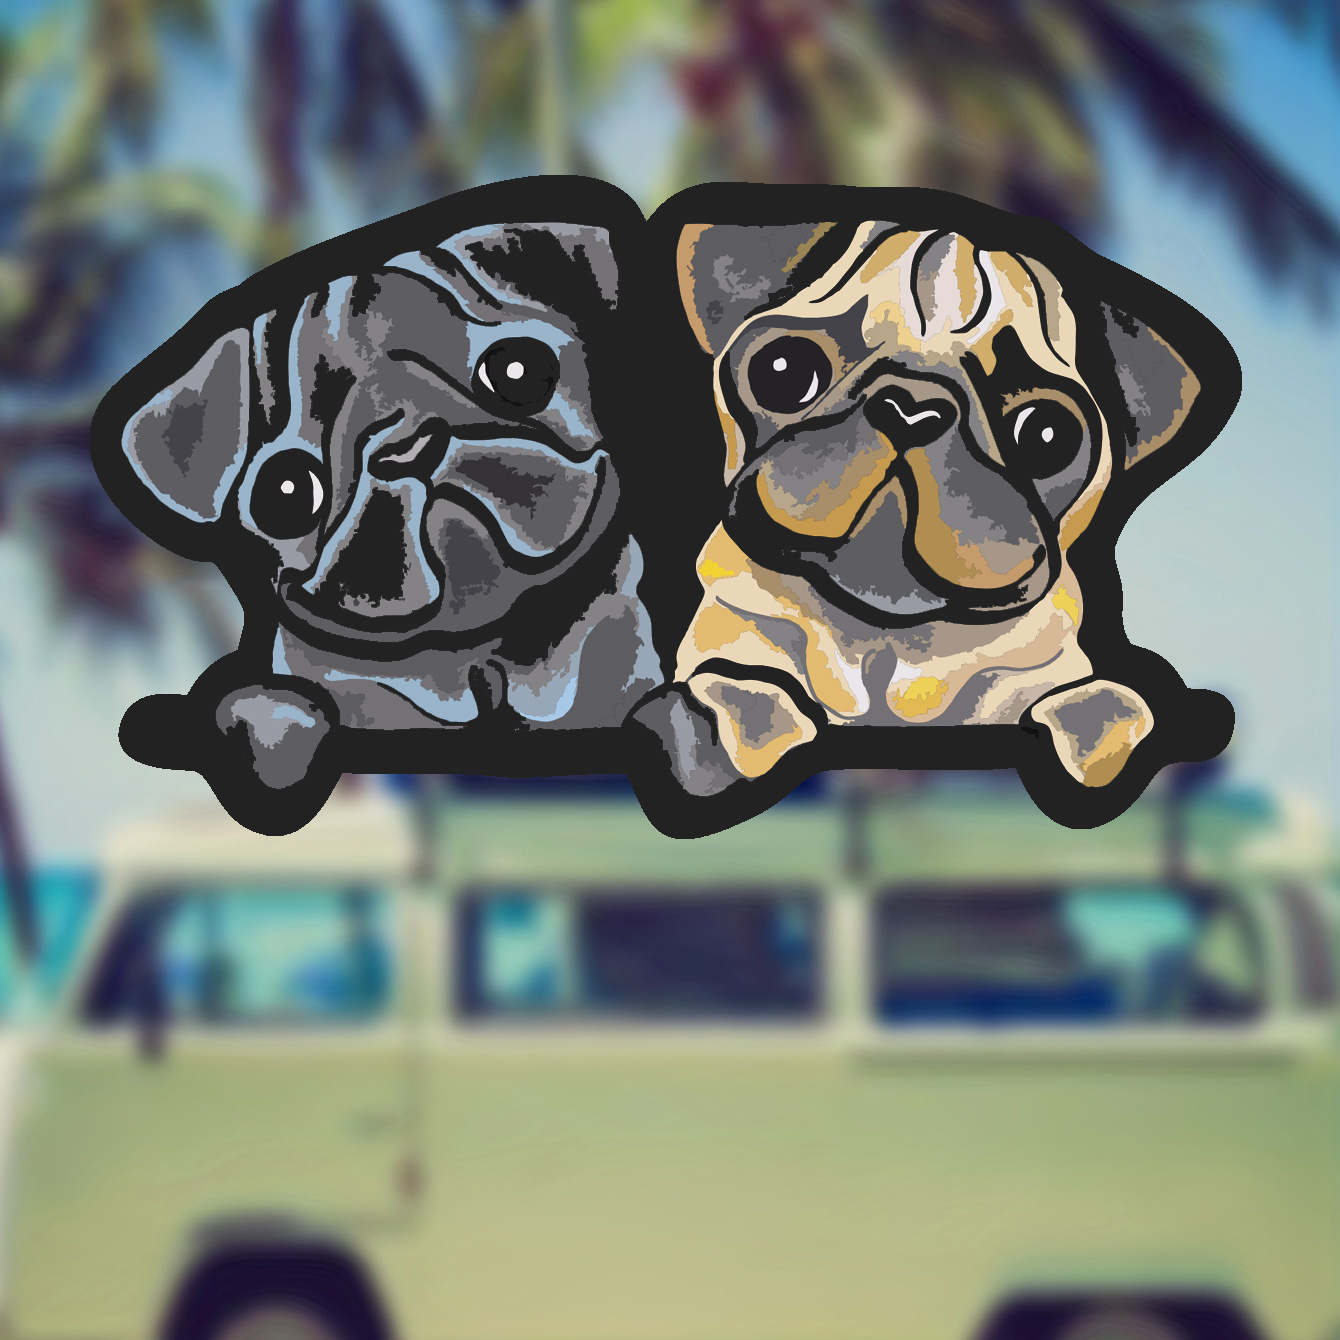 

Pug Pals Vinyl Car Bumper Sticker - Matte Finish, Cartoon Animal Theme, Perfect For Cars, Laptops & More - Durable, Easy Apply Decal